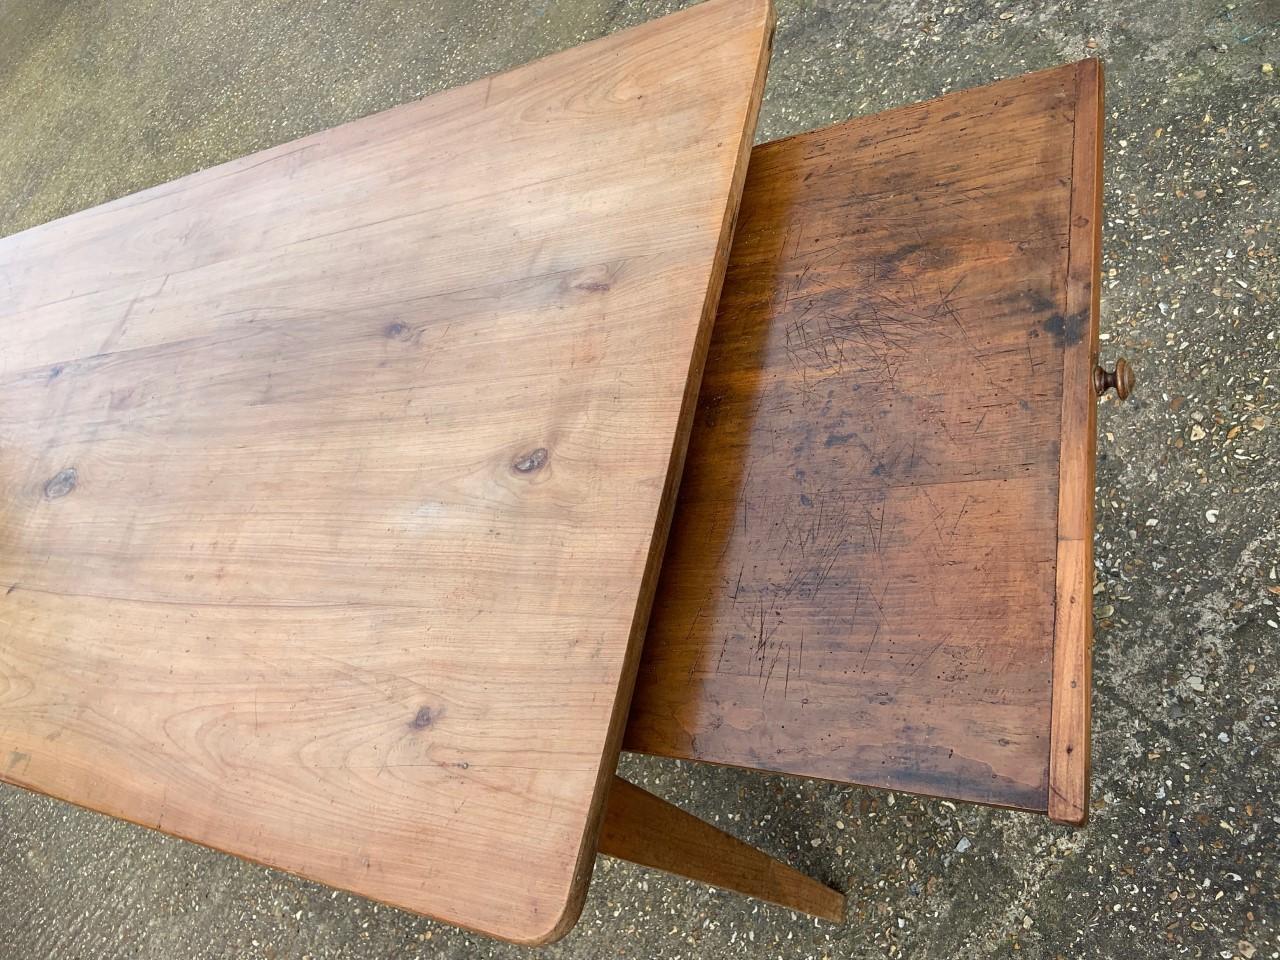 19th century pale rustic cherry wide farmhouse dining table. 19th century pale wide cherry dining table with bread slide. Table sits on apron with beautiful tapered legs. Lovely wide pale top.